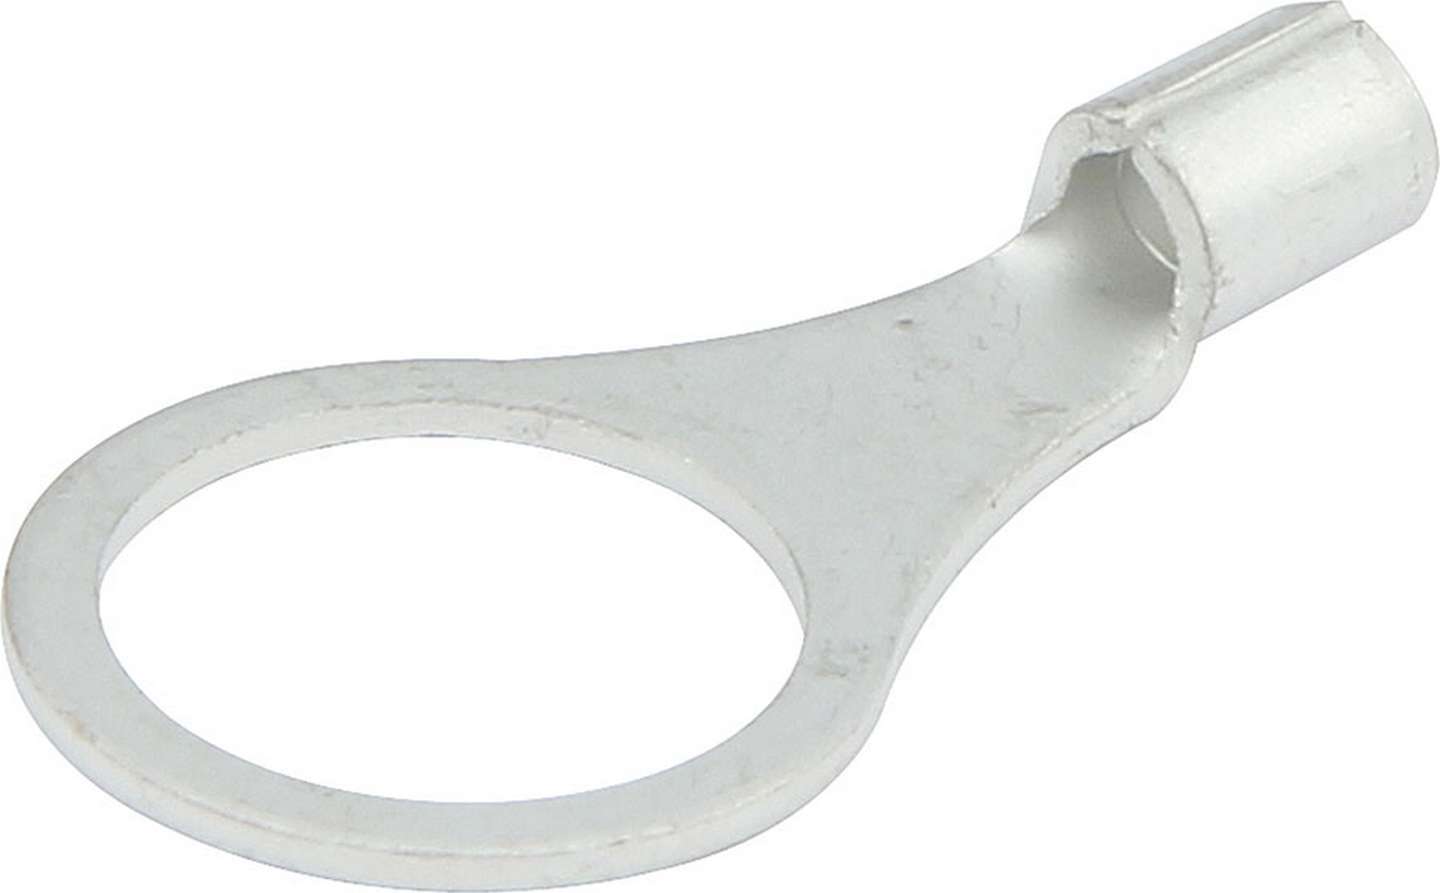 Ring Terminal 3/8in Hole Non-Insulated 16-14 20pk